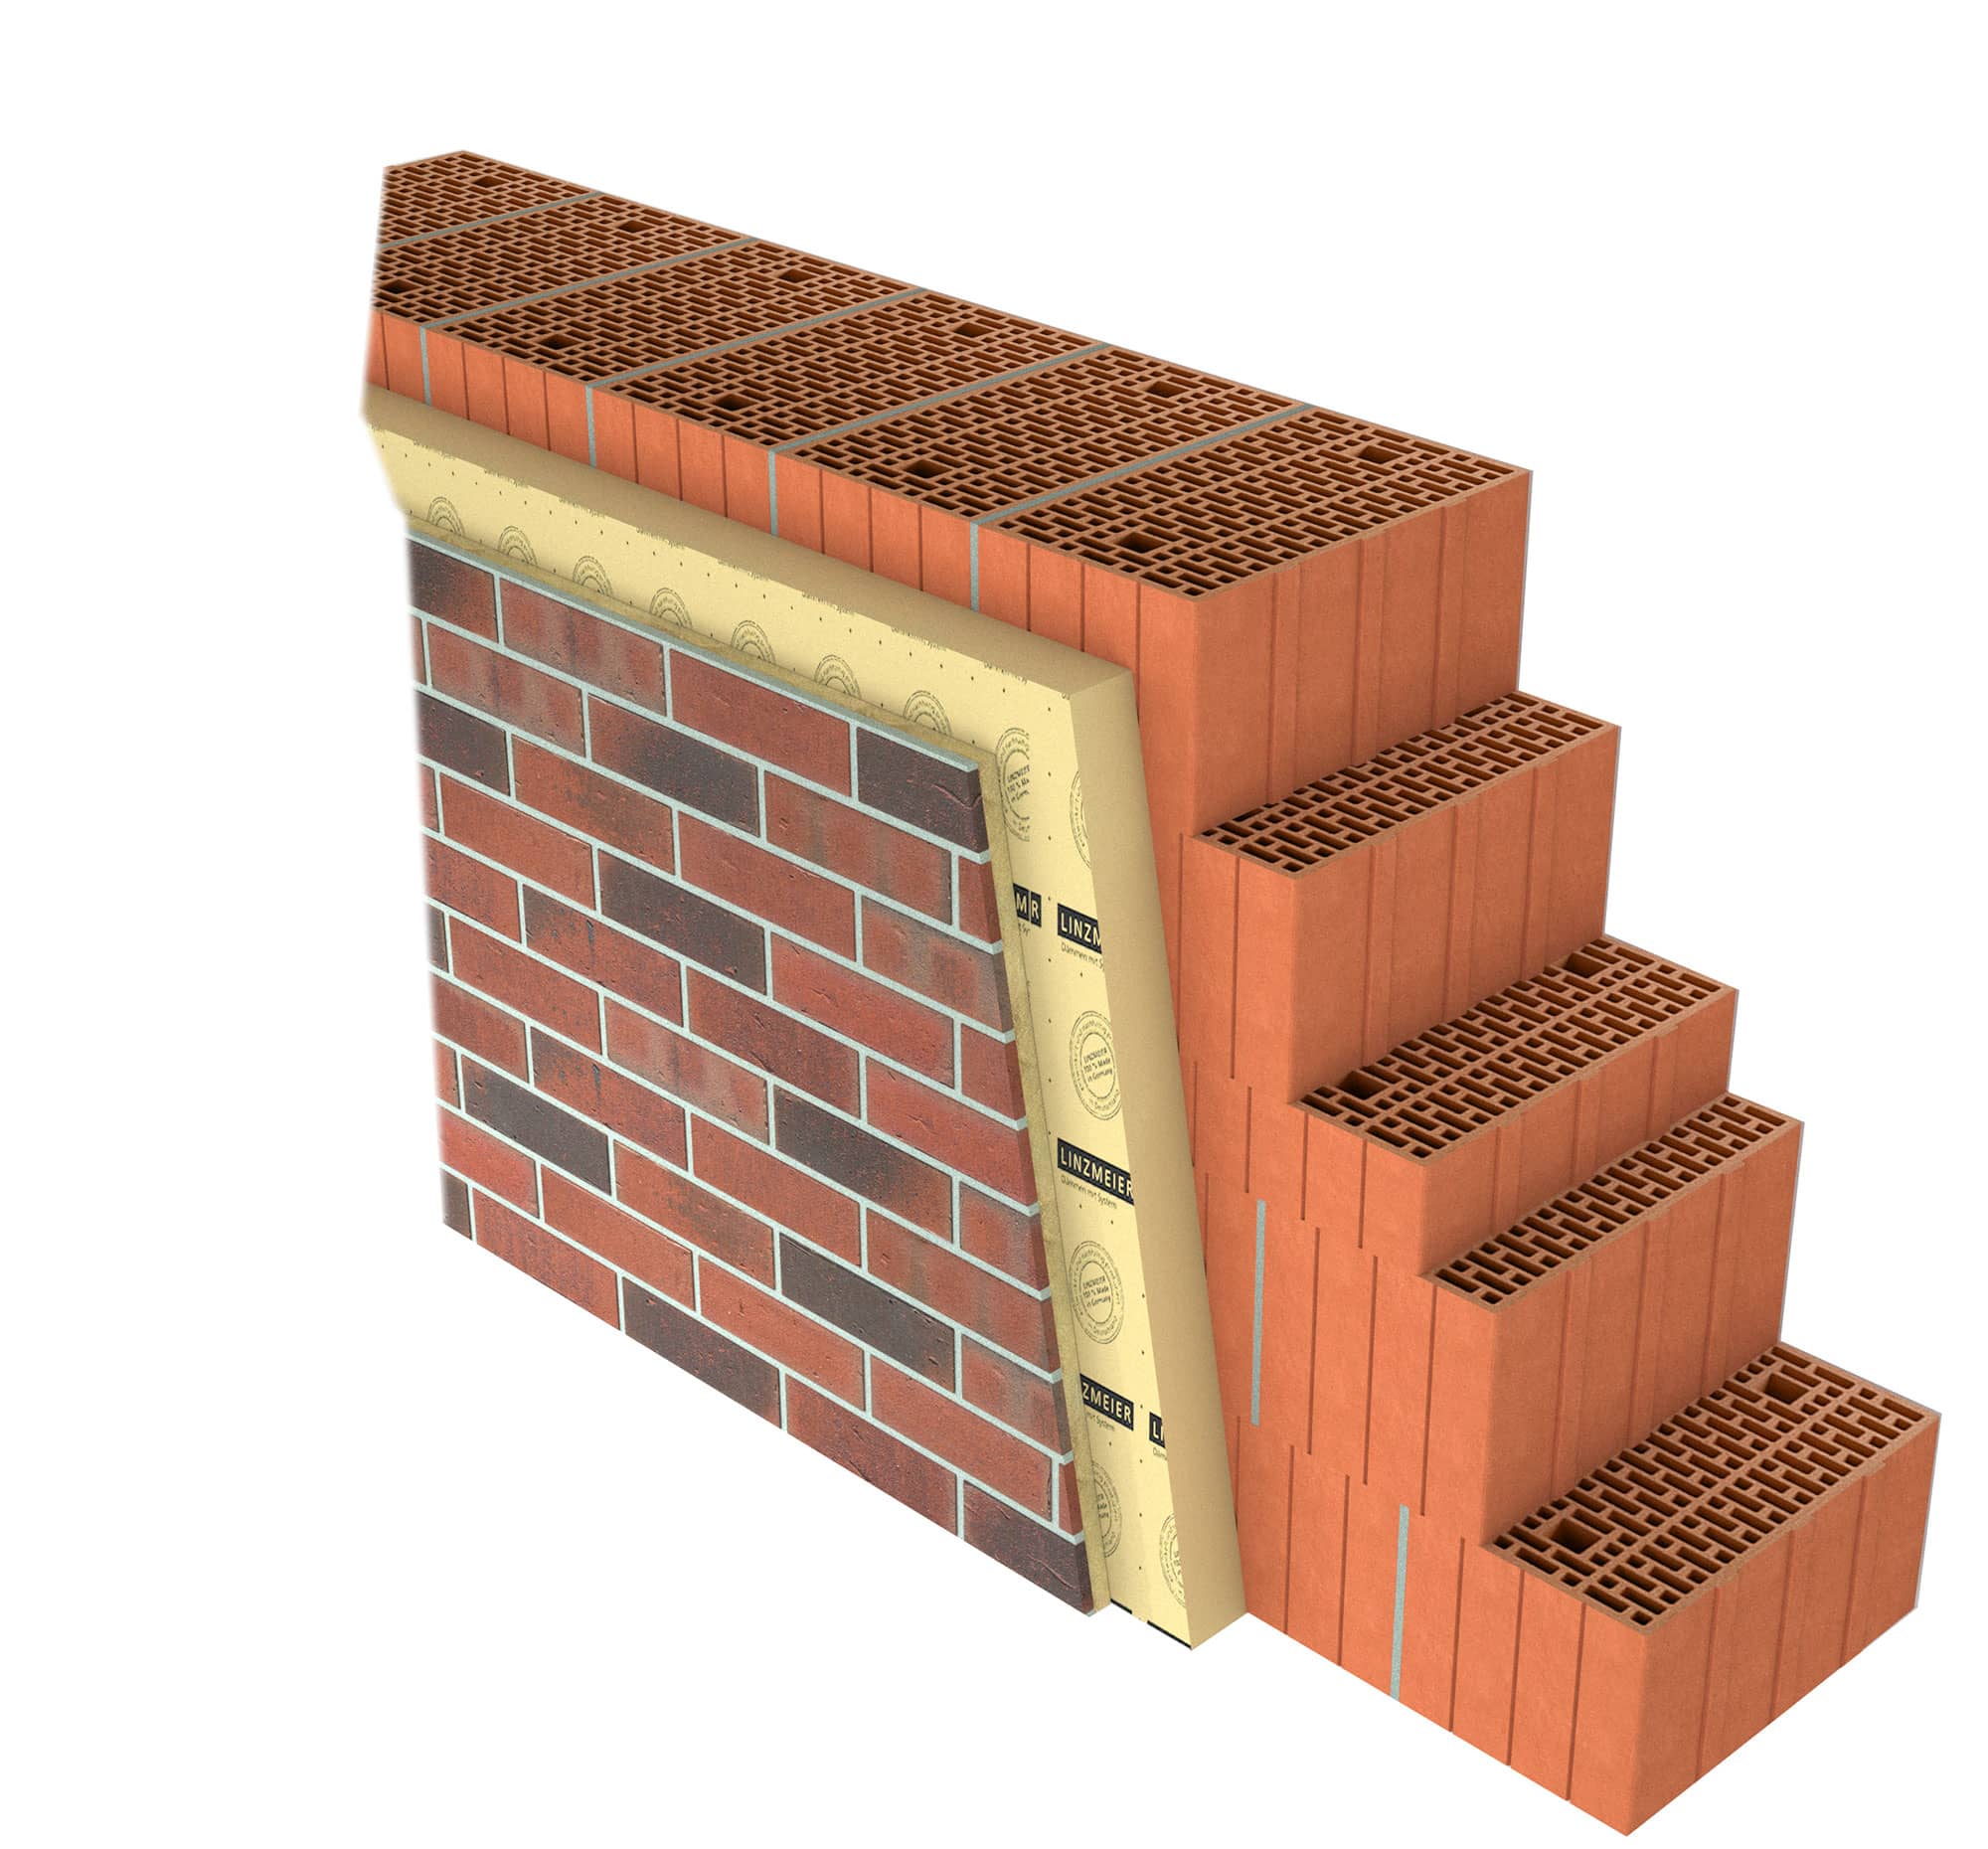 System kess with PUR insulation on vertically perforated brick